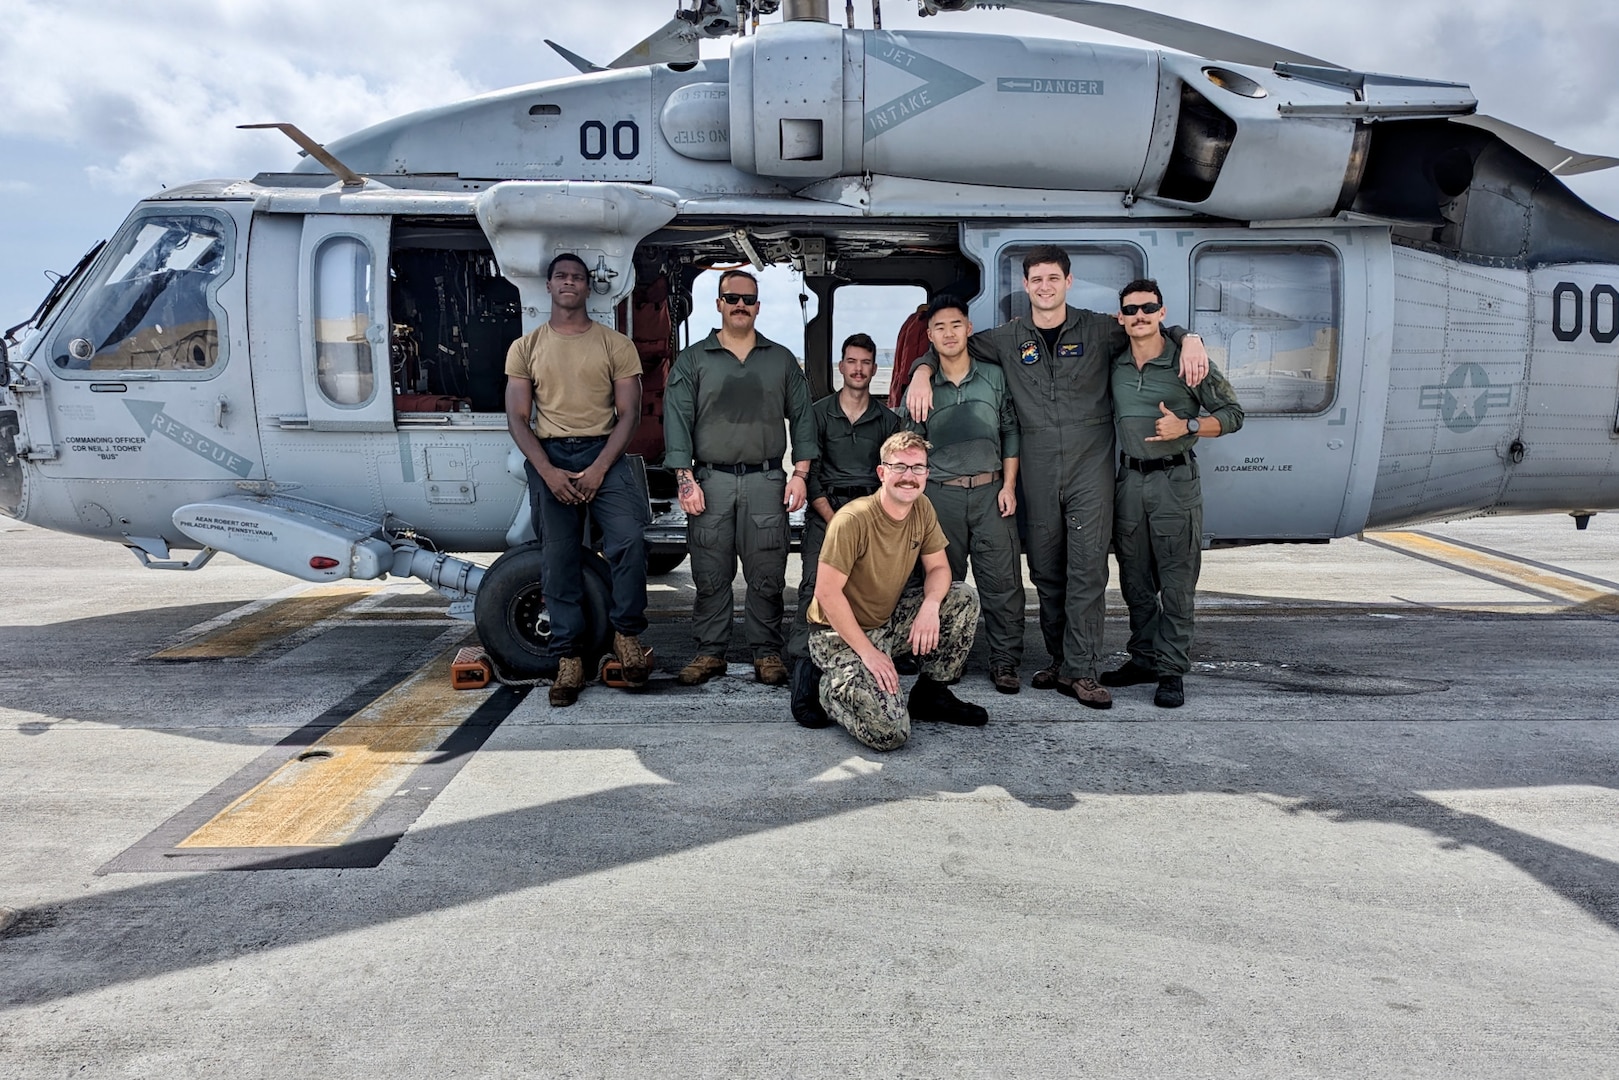 In a display of interagency cooperation, a commercial mariner in urgent need of medical care was safely evacuated from his vessel 100 nautical miles offshore to Guam on March 2, 2024, thanks to the actions of the U.S. Coast Guard and the U.S. Navy's Helicopter Sea Combat Squadron 25 (HSC-25). The crew takes a moment for a photo after the medical evacuation: Lt. Kolby Ingram, Lt. Andrew Chung, AWS2 Blake Clark, AWS3 Ethan Kubat, and HM1 Christopher Finley. (U.S. Navy photo)